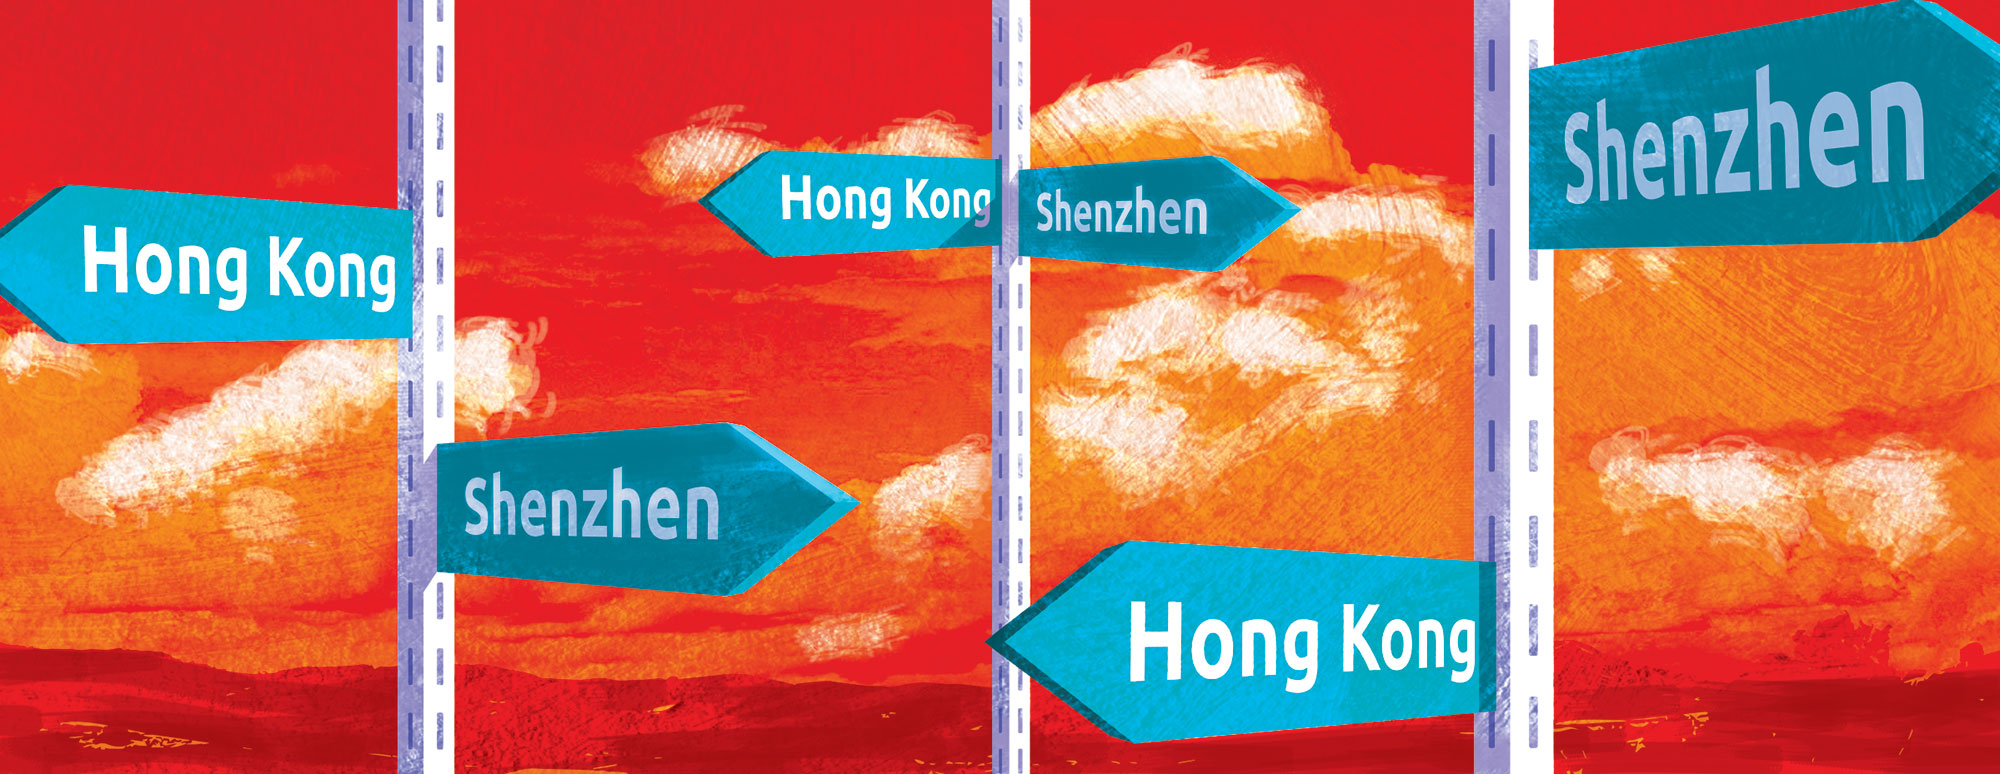 A tale of two cities: how Shenzhen compares to Hong Kong